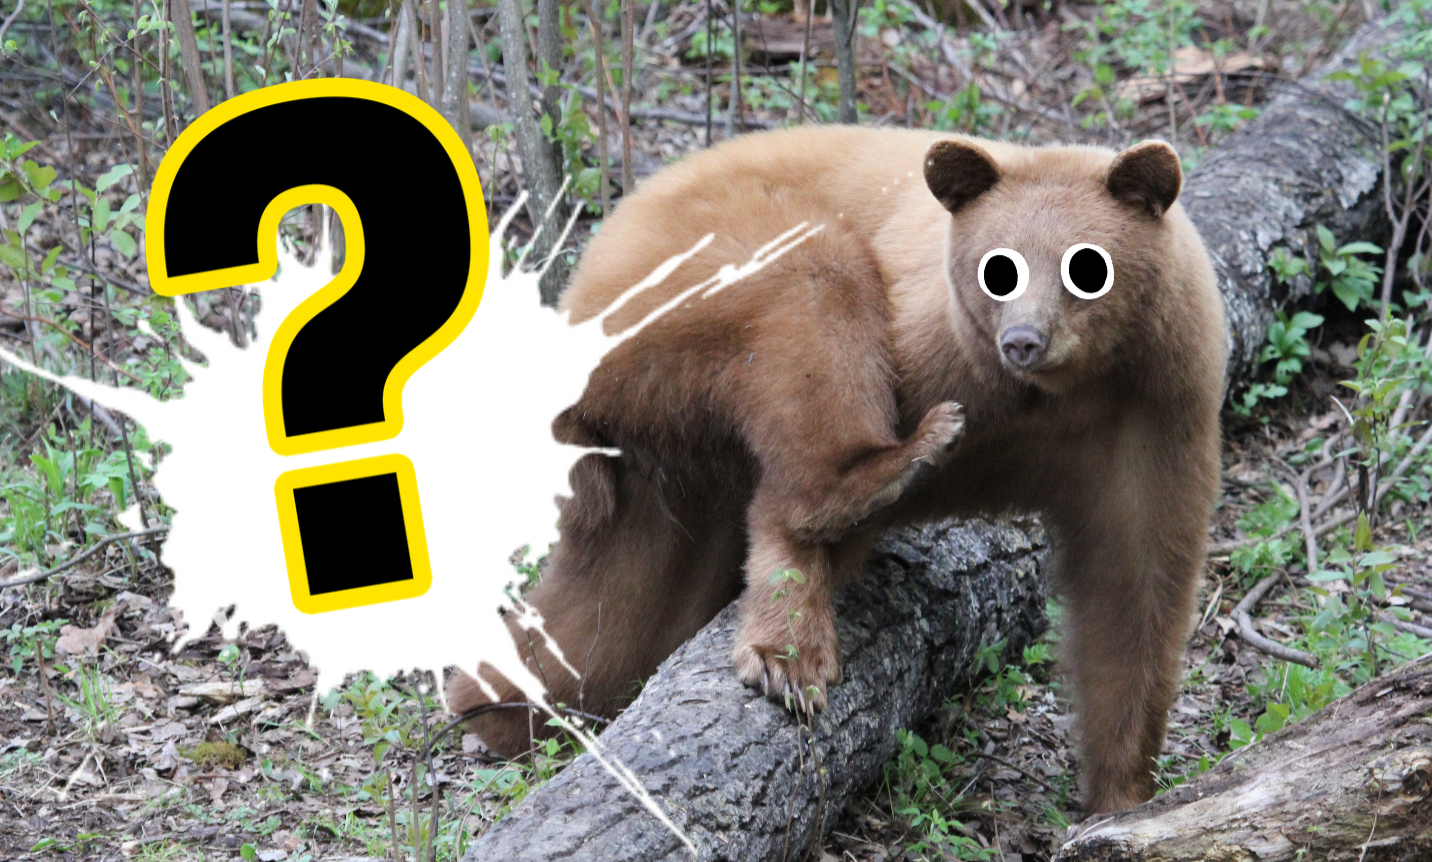 It's a picture of a real-life grizzly bear! Eek!